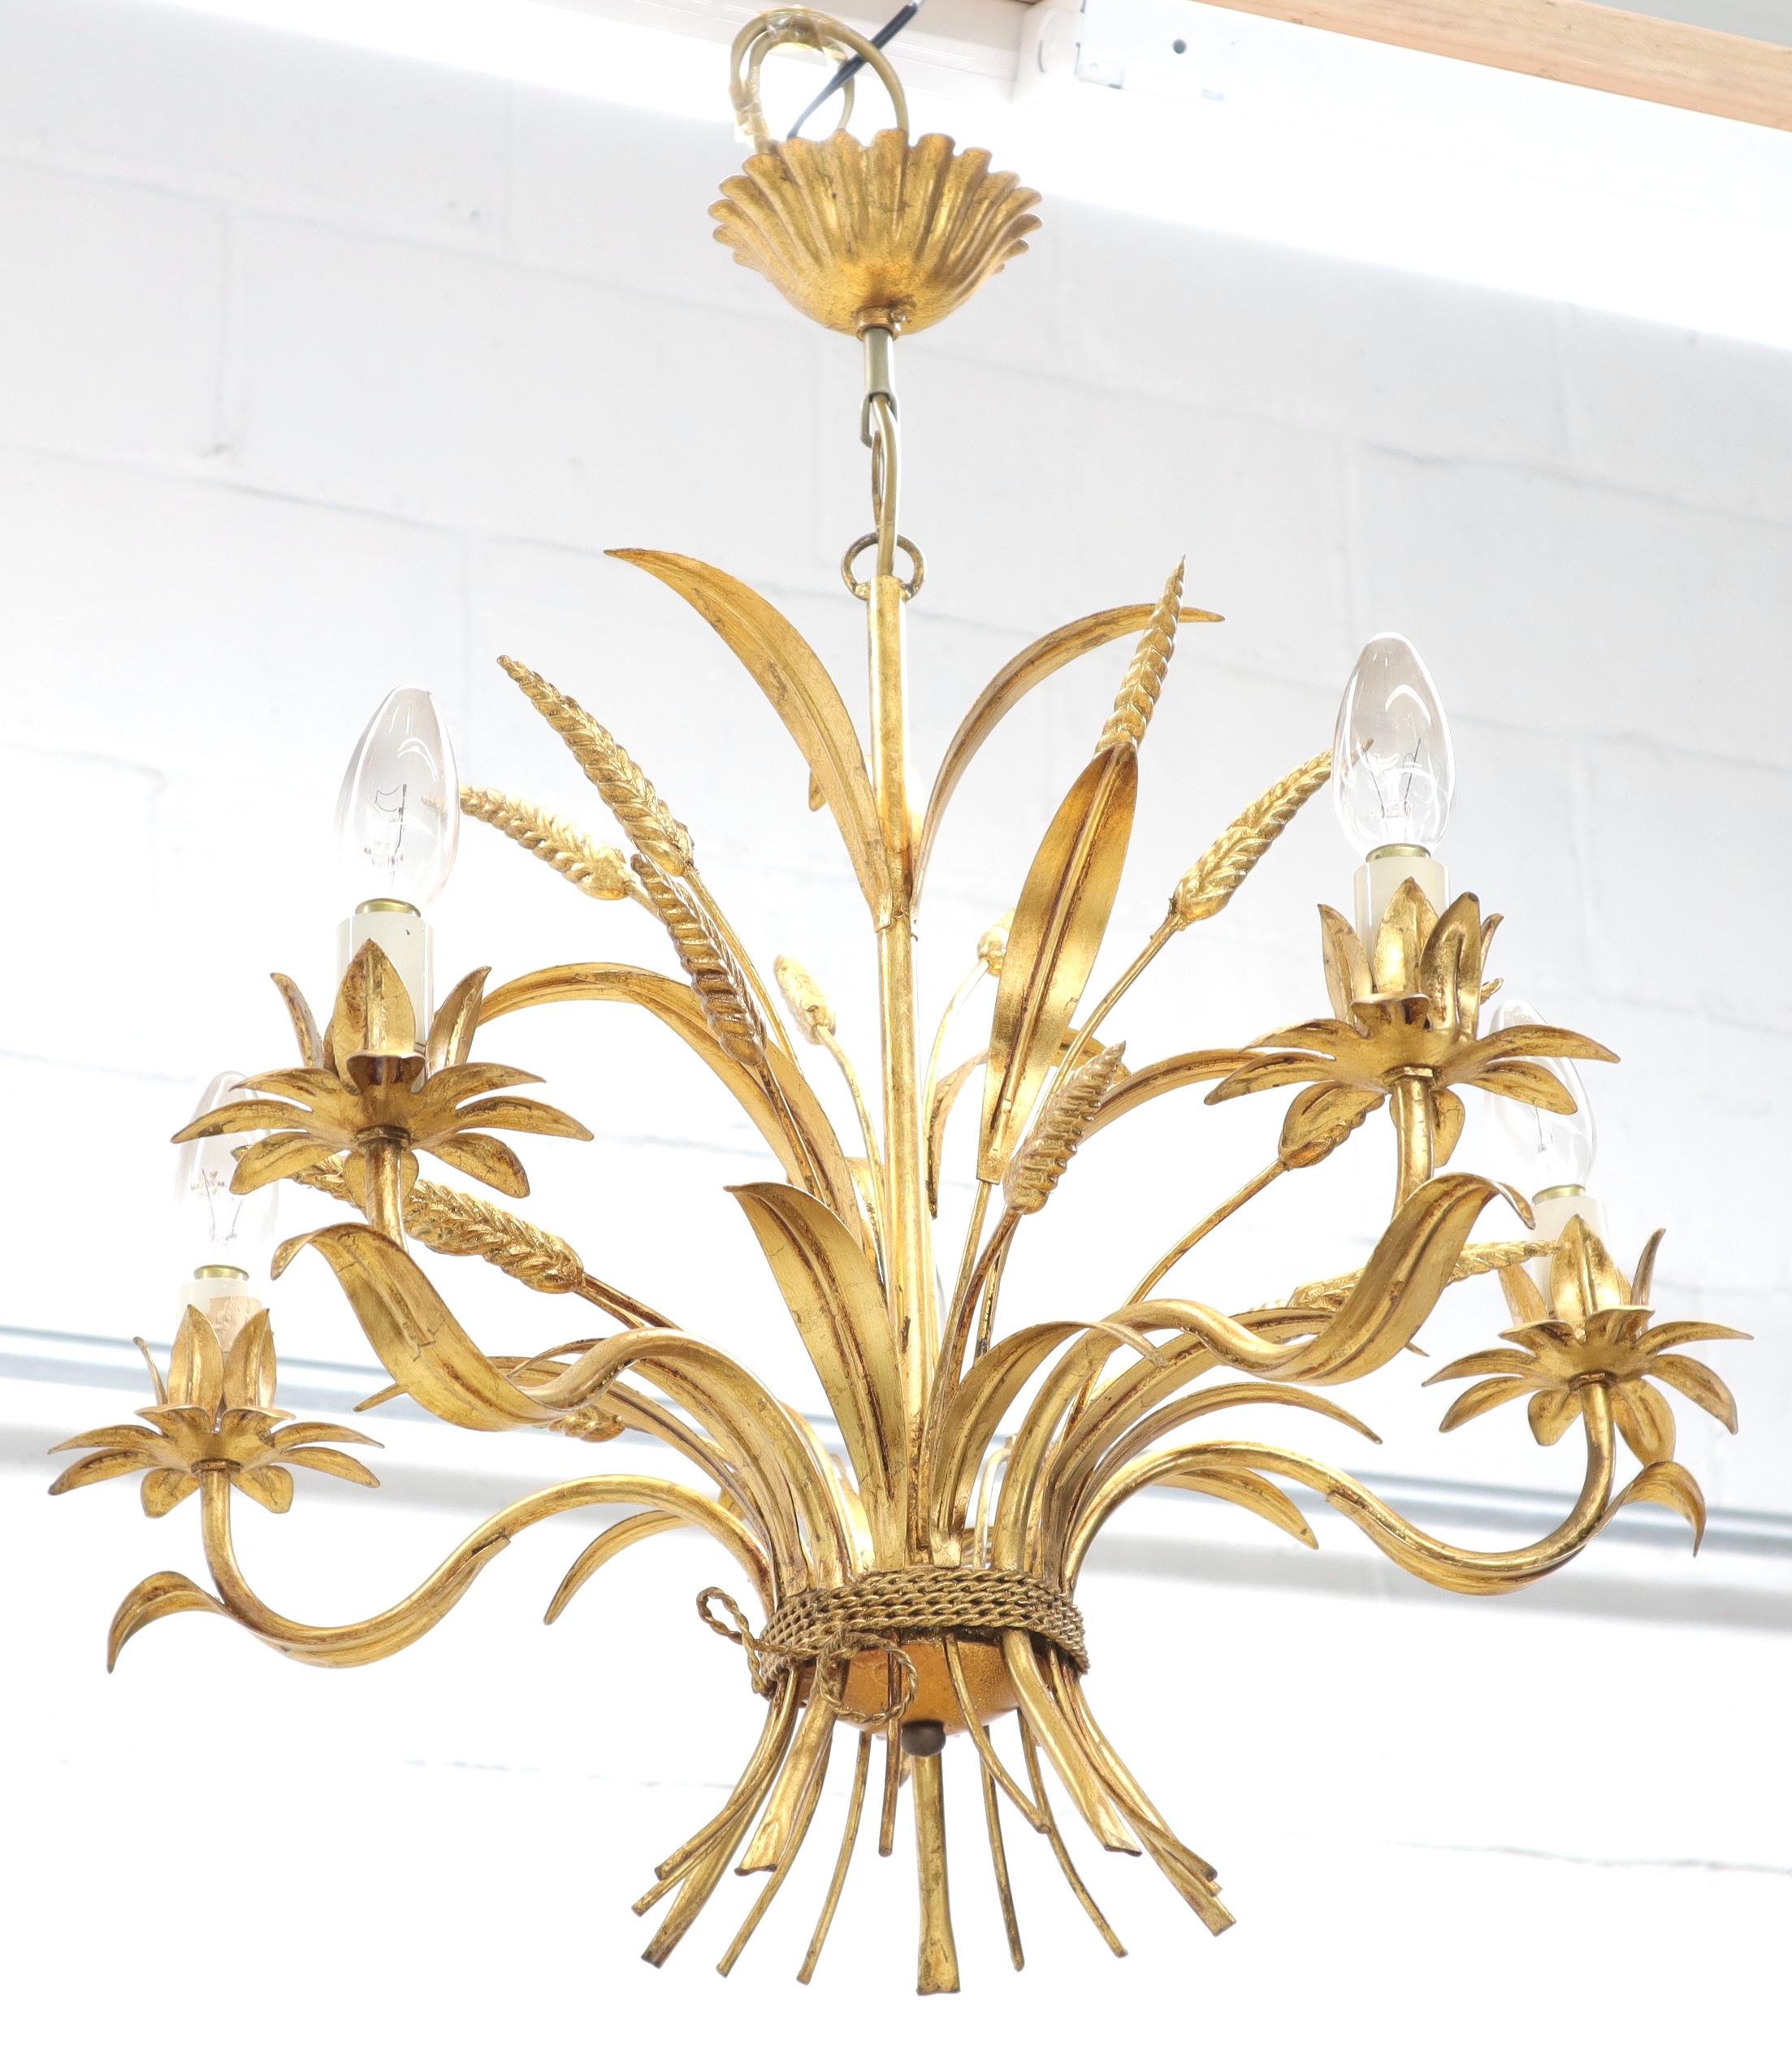 Gold Gilt Metal Cattail Sheaf Light Fixture Chandelier  In Excellent Condition For Sale In Rockaway, NJ